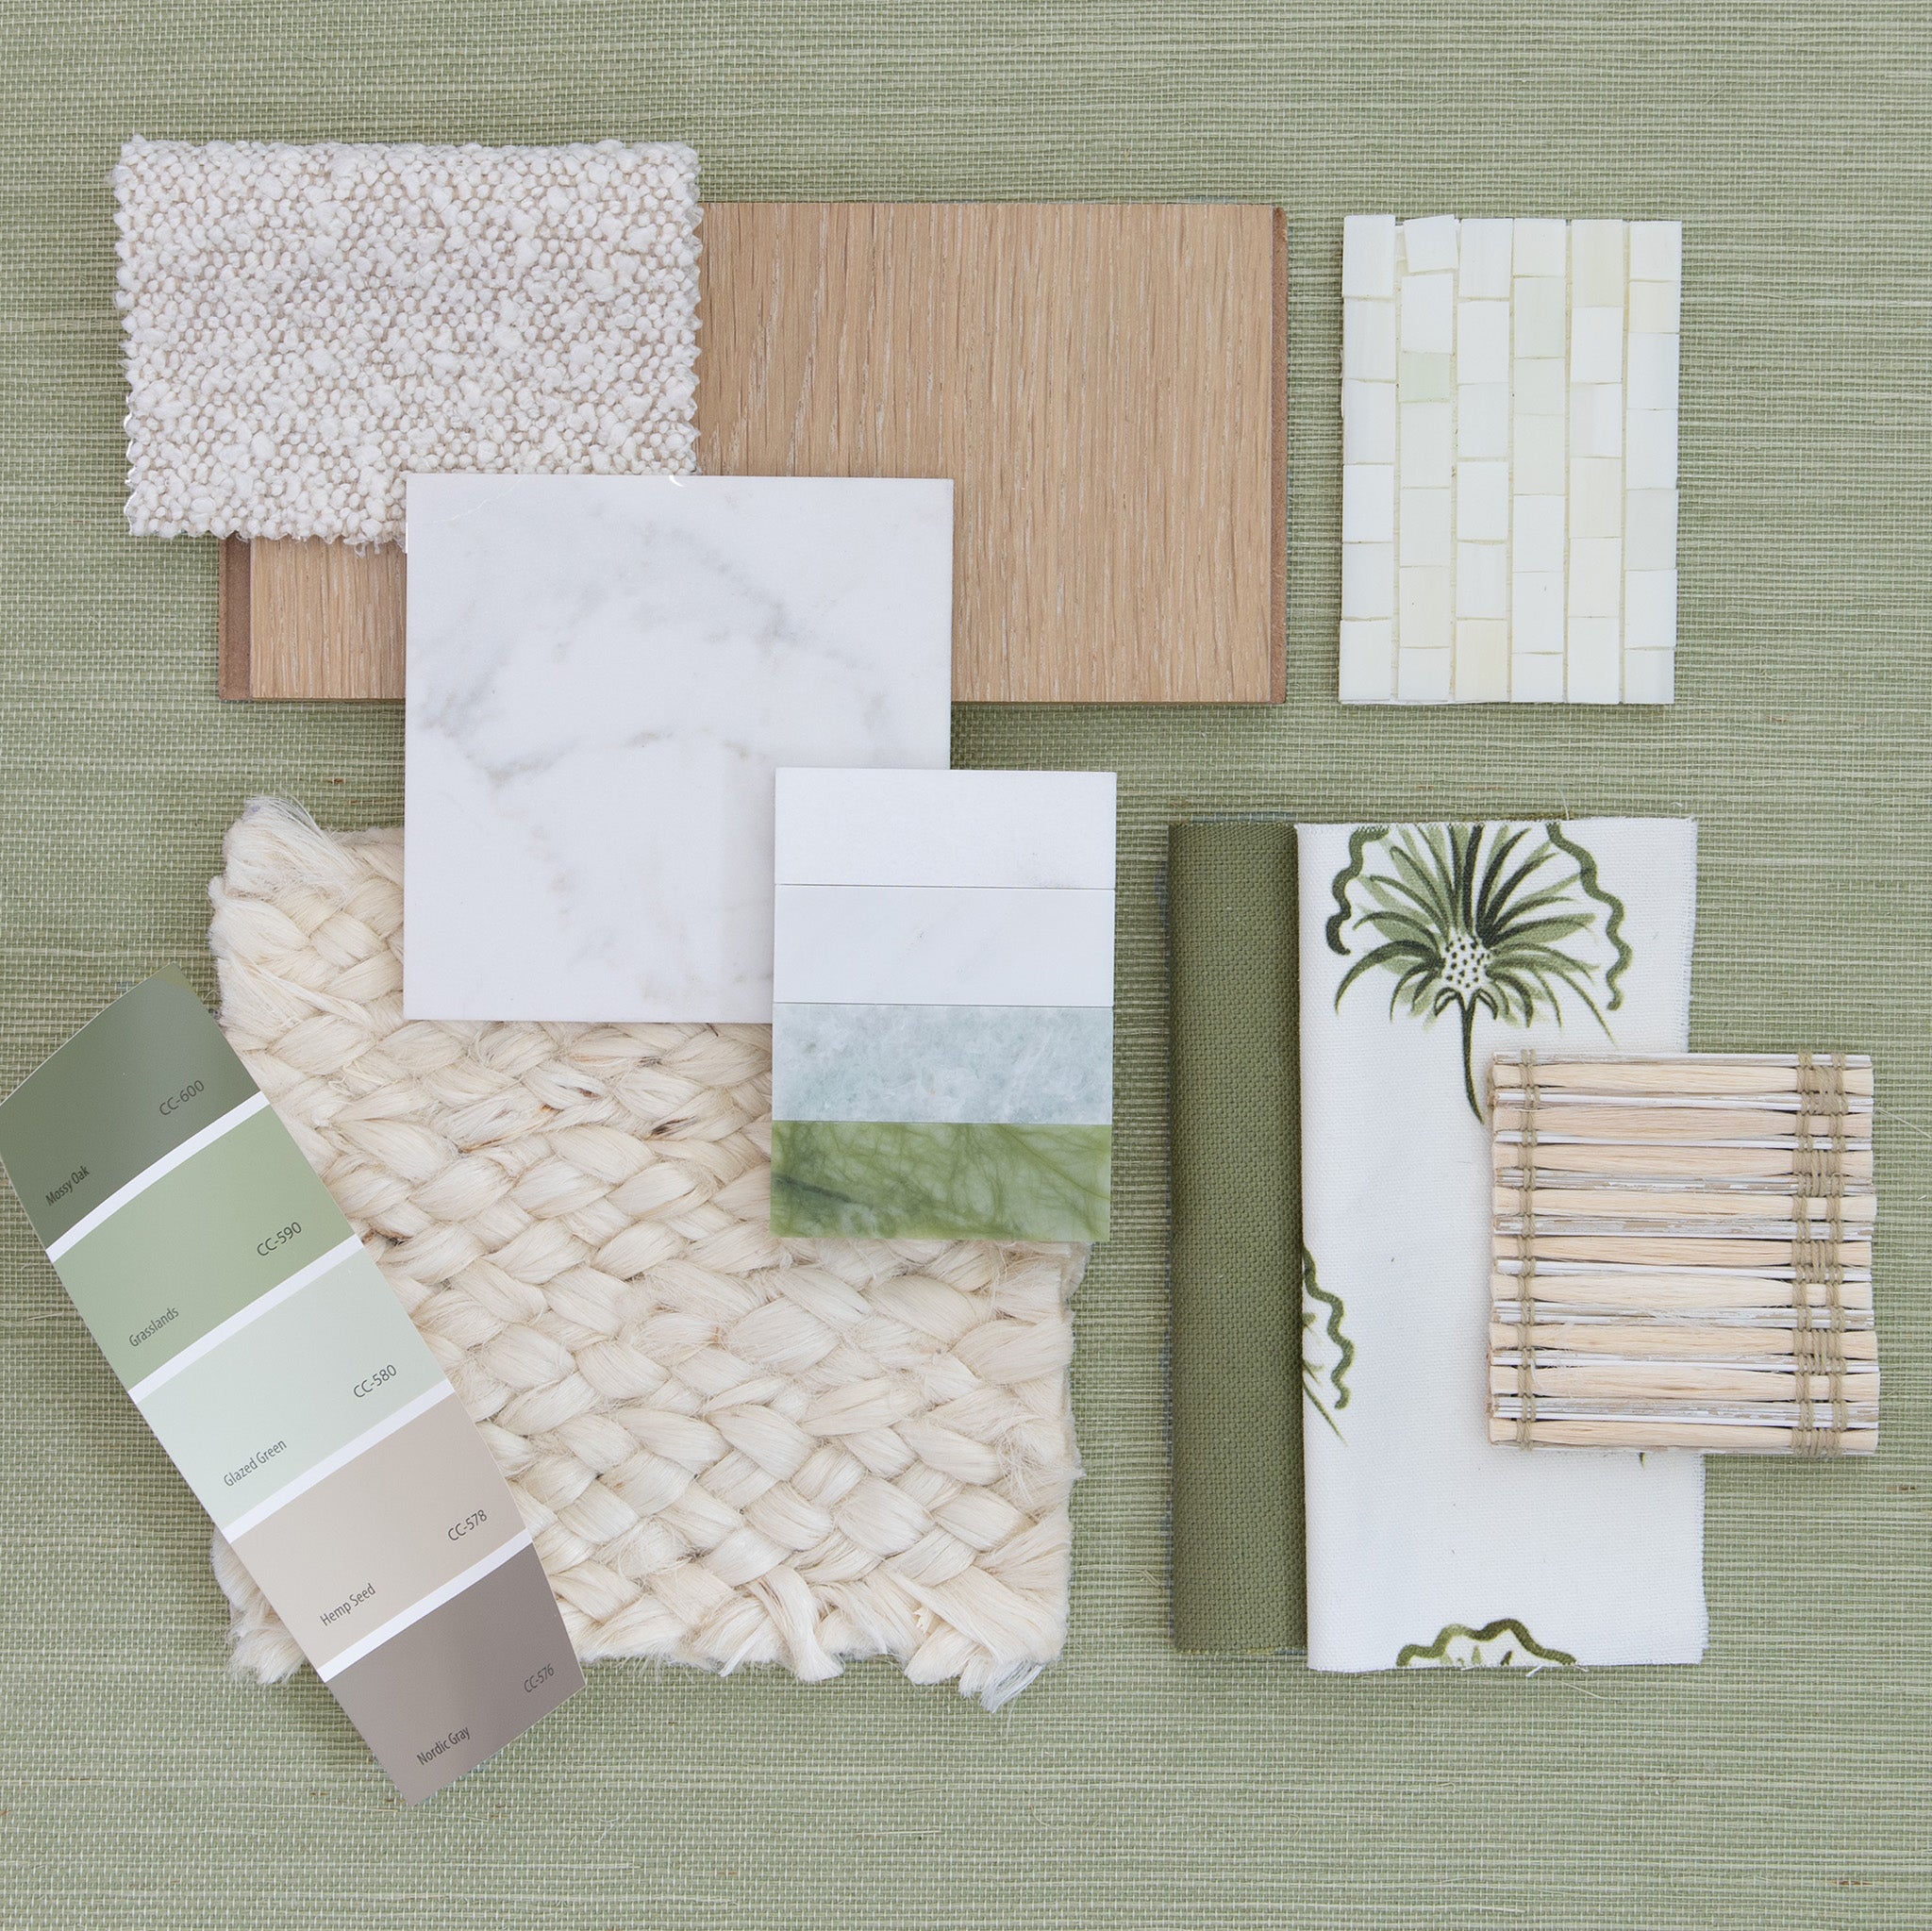 interior design moodboard and wallpaper inspirations with green and neutral paint and tiles on top